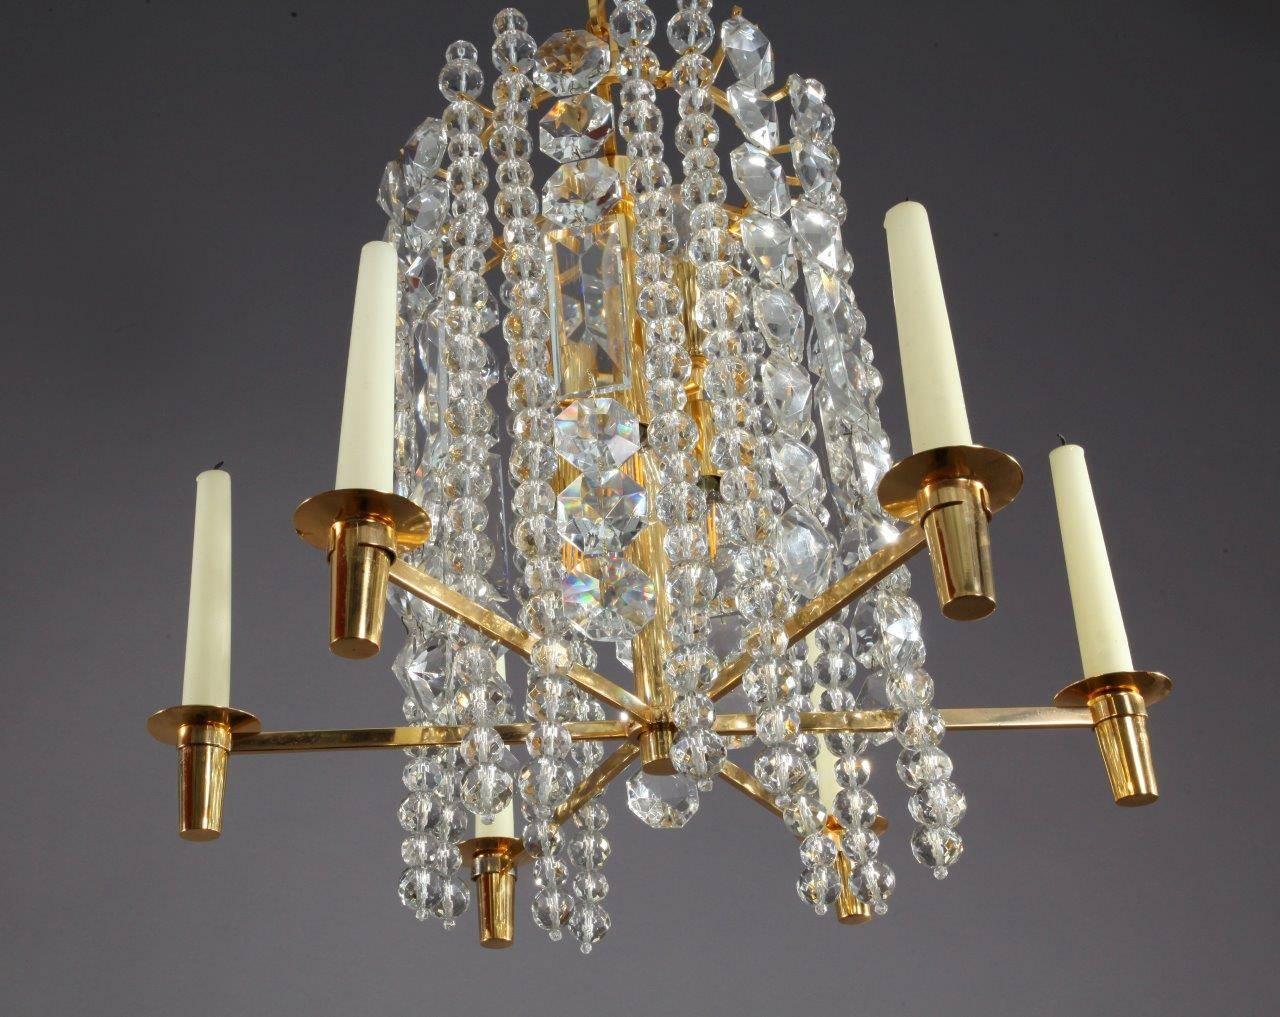 A unique and high quality gold-plated chandelier or pendant light by Bakalowits & Soehne, Austria, manufactured in Mid-Century, circa 1960.
The light fixture is made of a gilded brass frame and chains in different lengths decorated with hand cut